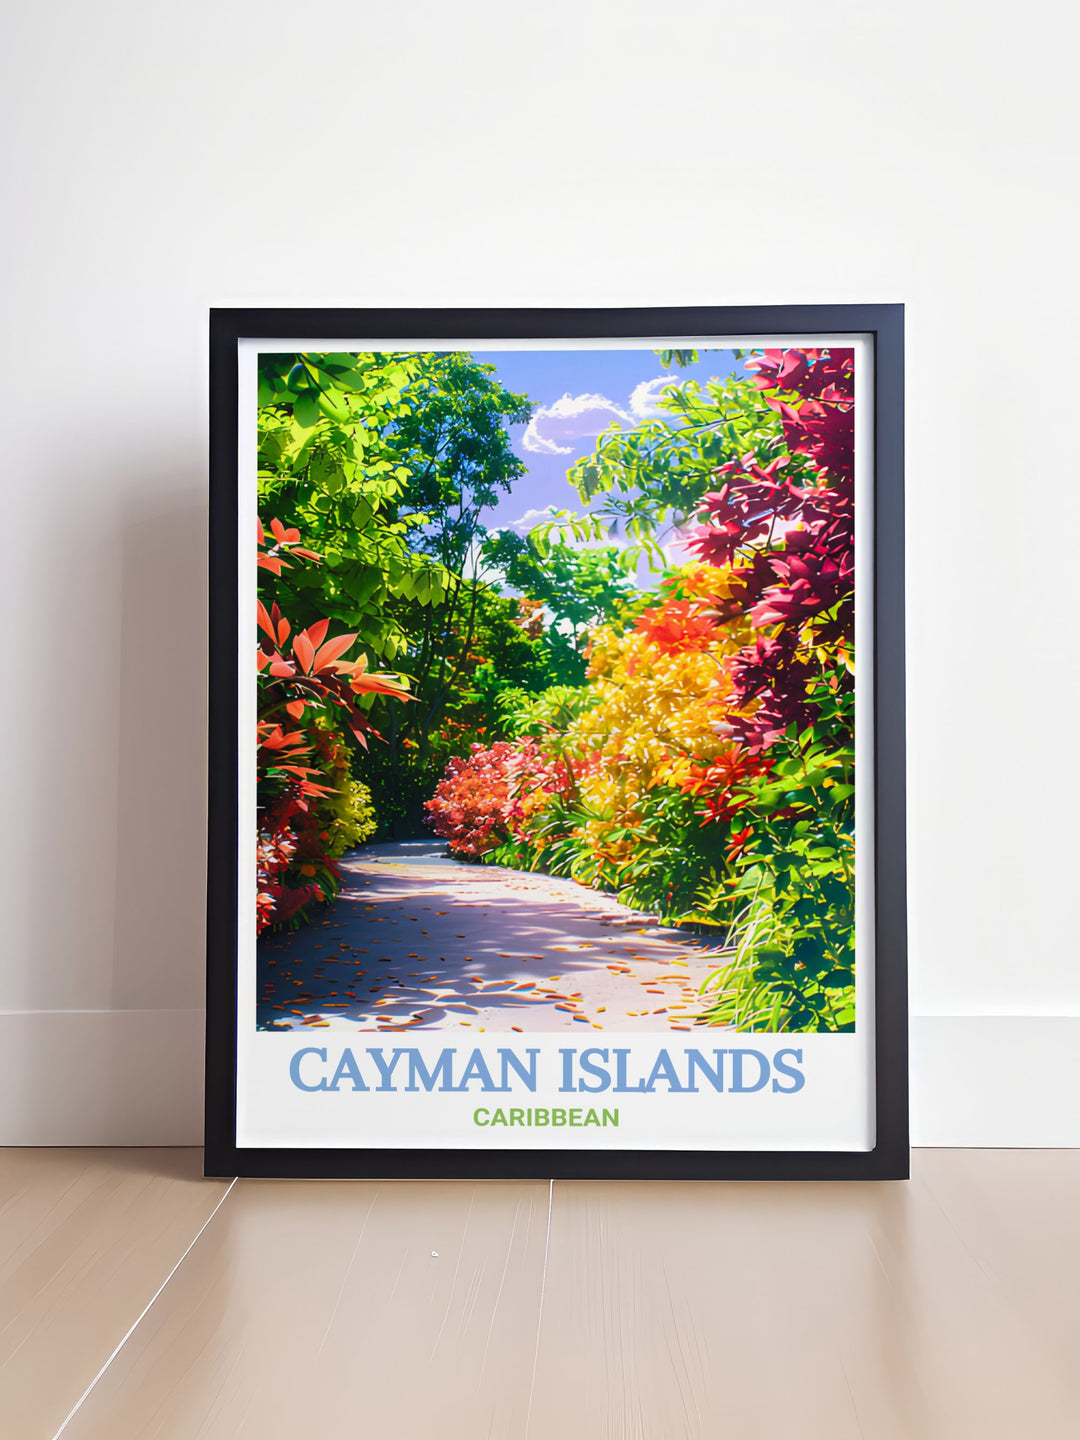 Cayman Islands art print of Queen Elizabeth II Botanic Park highlighting the serene landscapes of the Caribbean available as a digital download and personalized gift ideal for travel enthusiasts and lovers of elegant wall decor